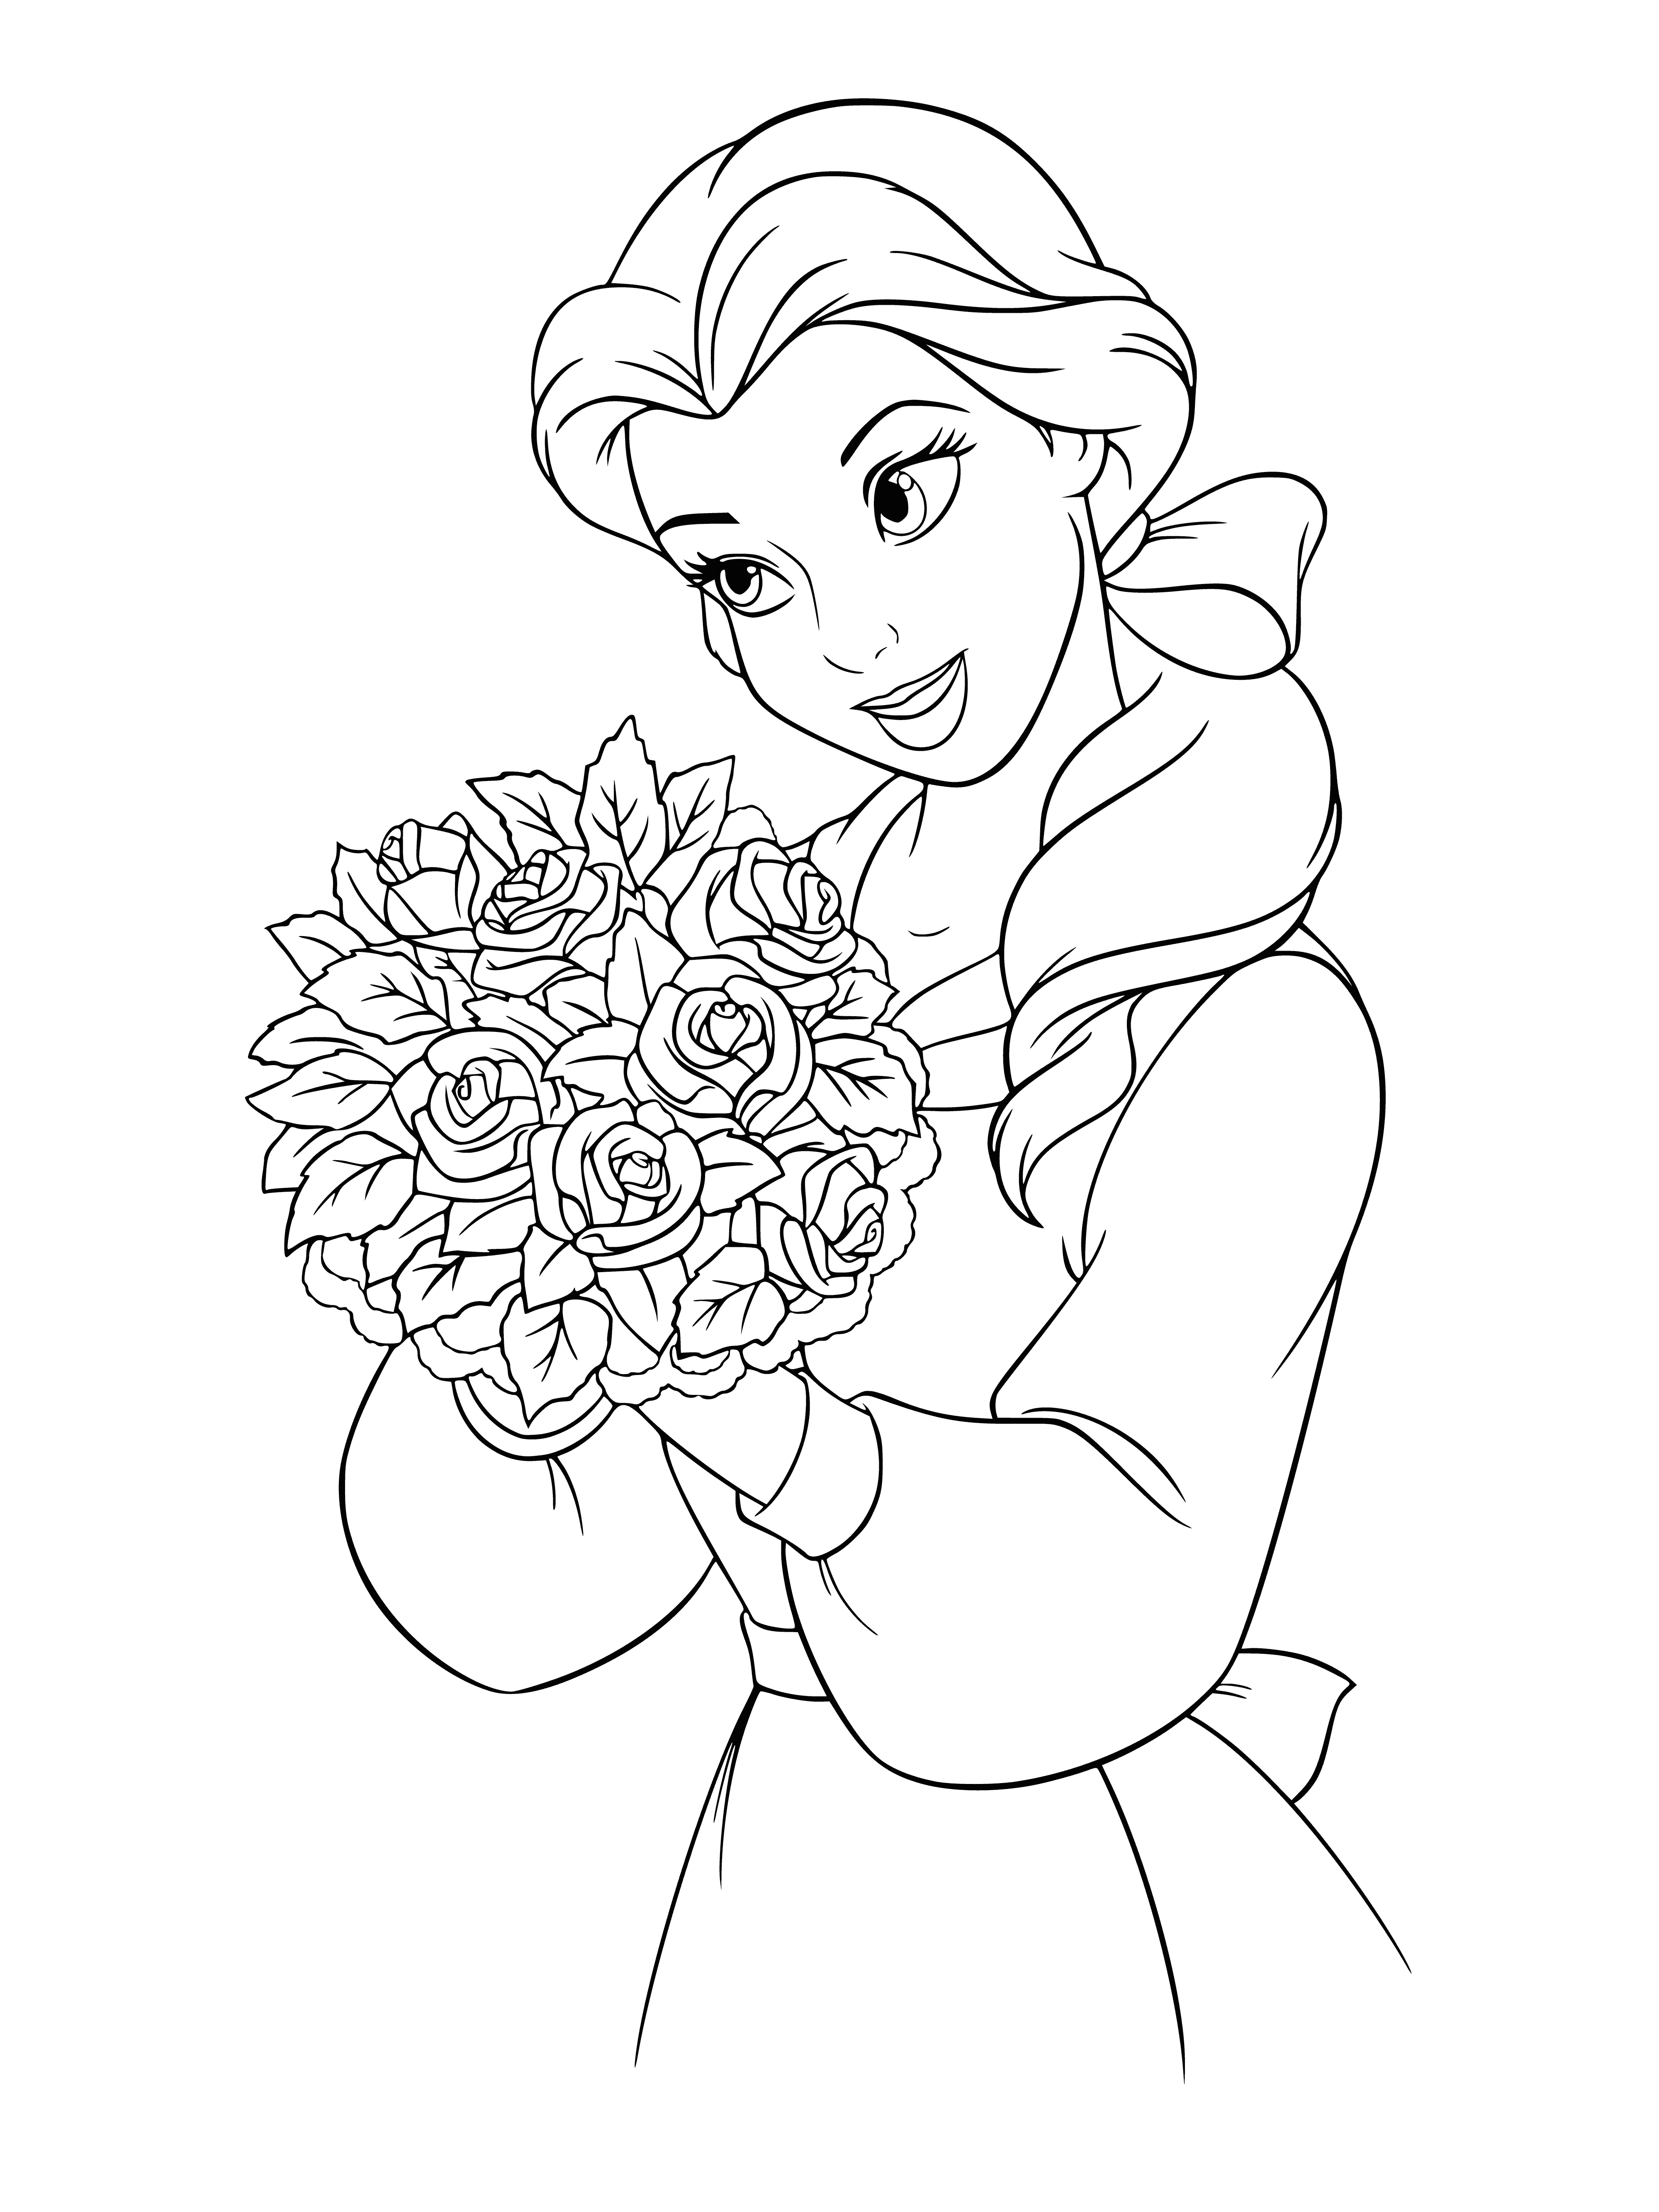 Belle with a bouquet of flowers coloring page